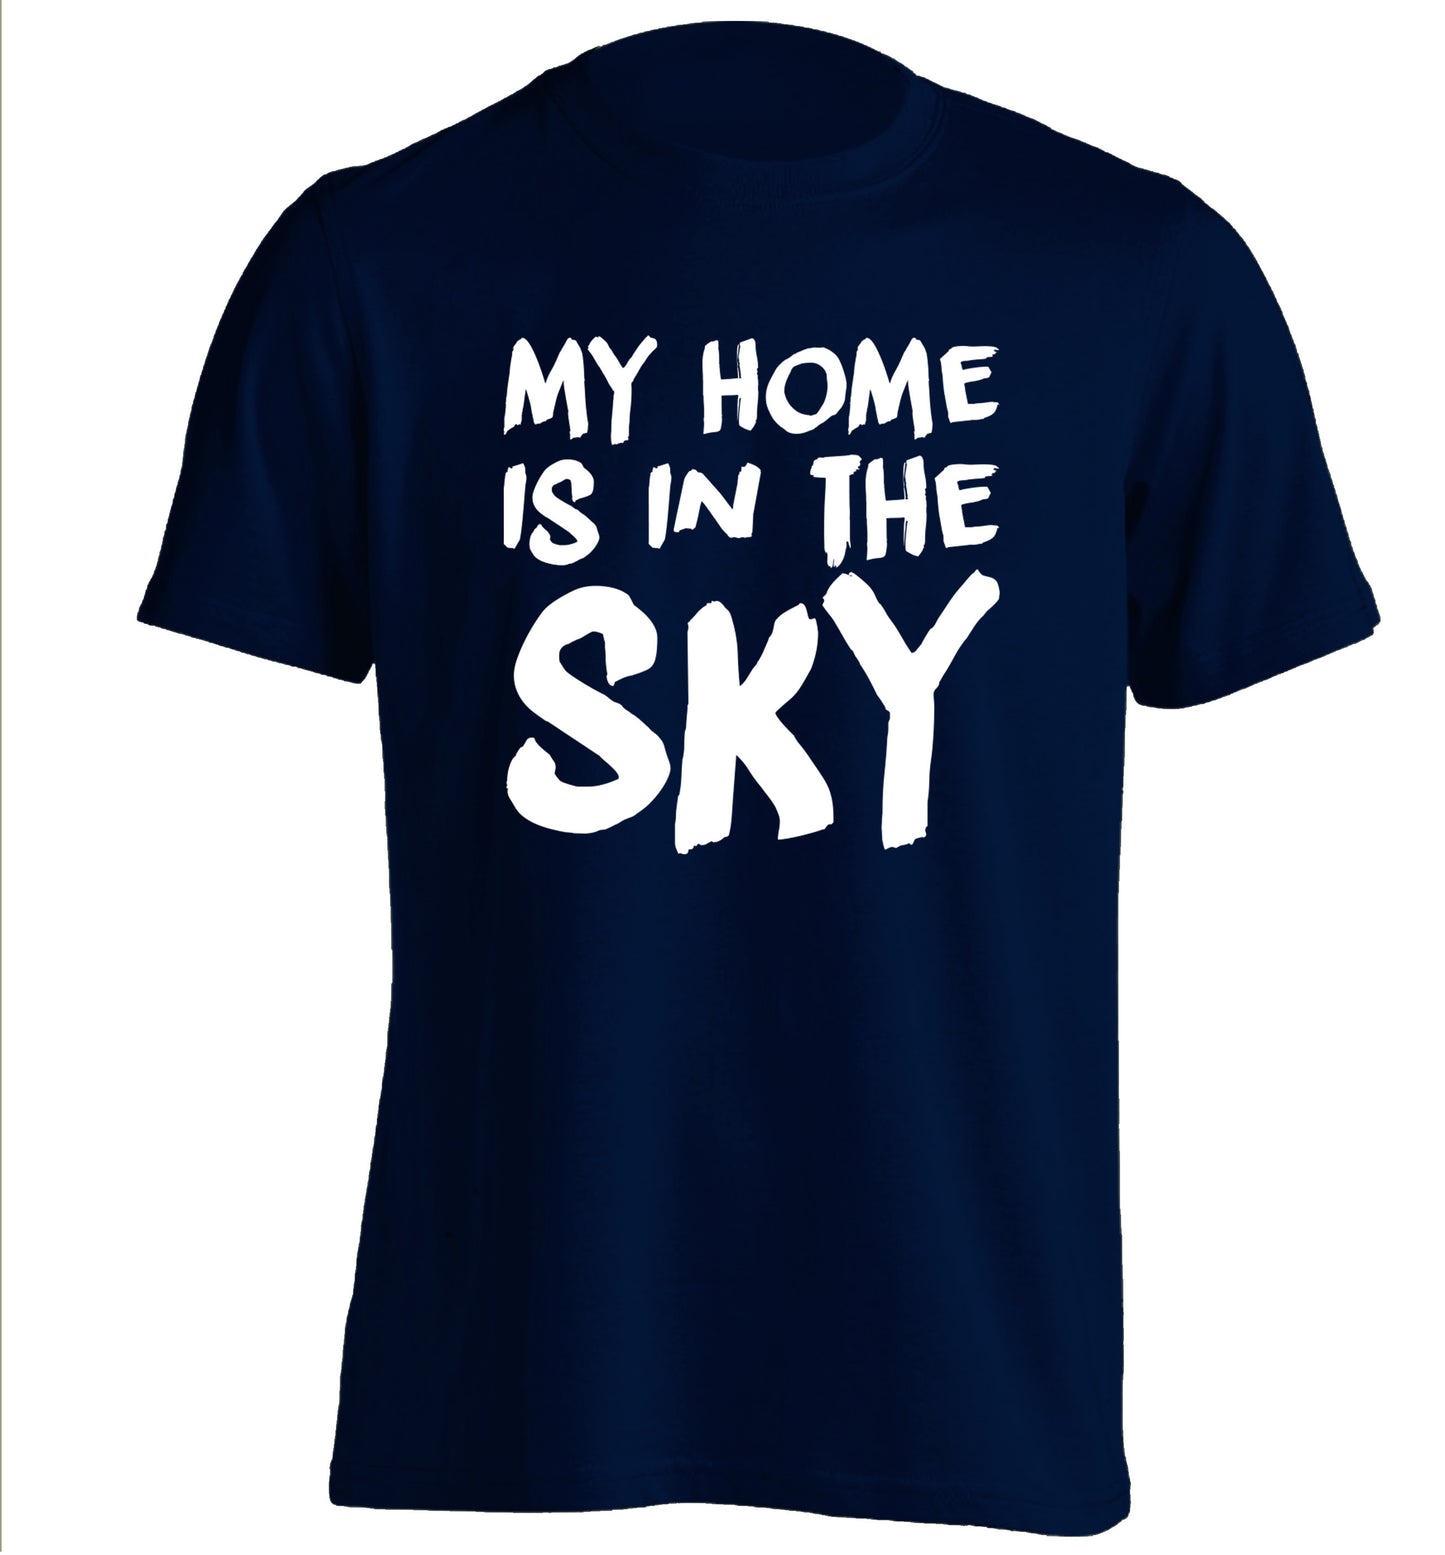 My home is in the sky adults unisex navy Tshirt 2XL